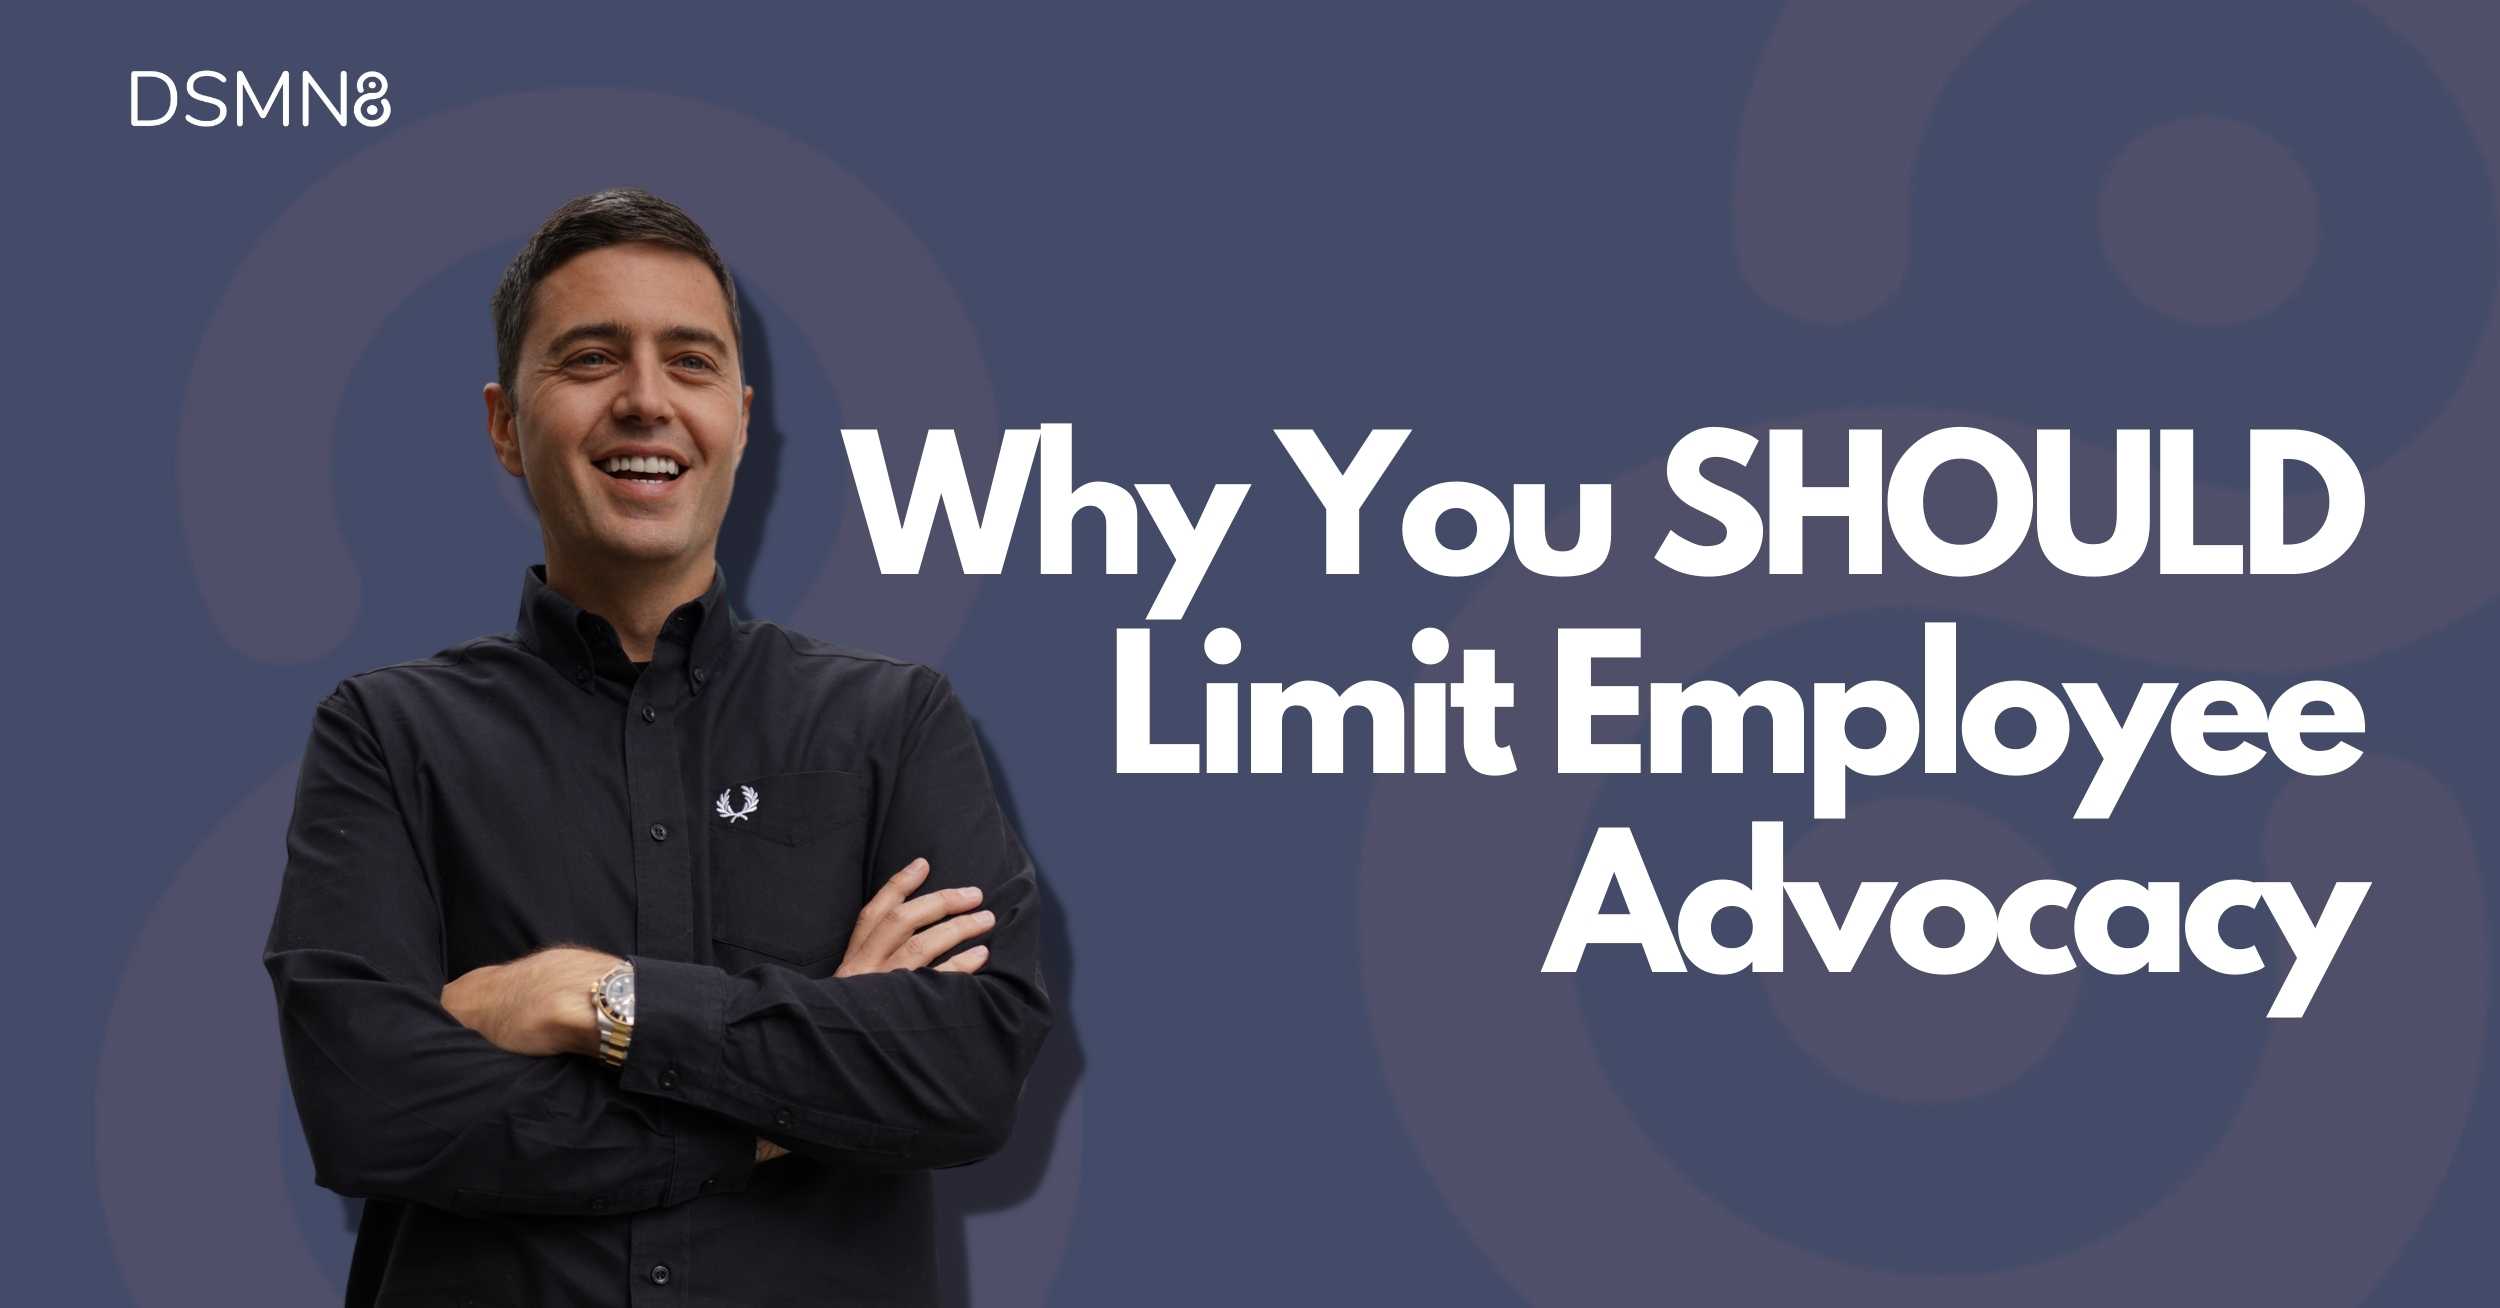 Why You SHOULD Limit Employee Advocacy | DSMN8